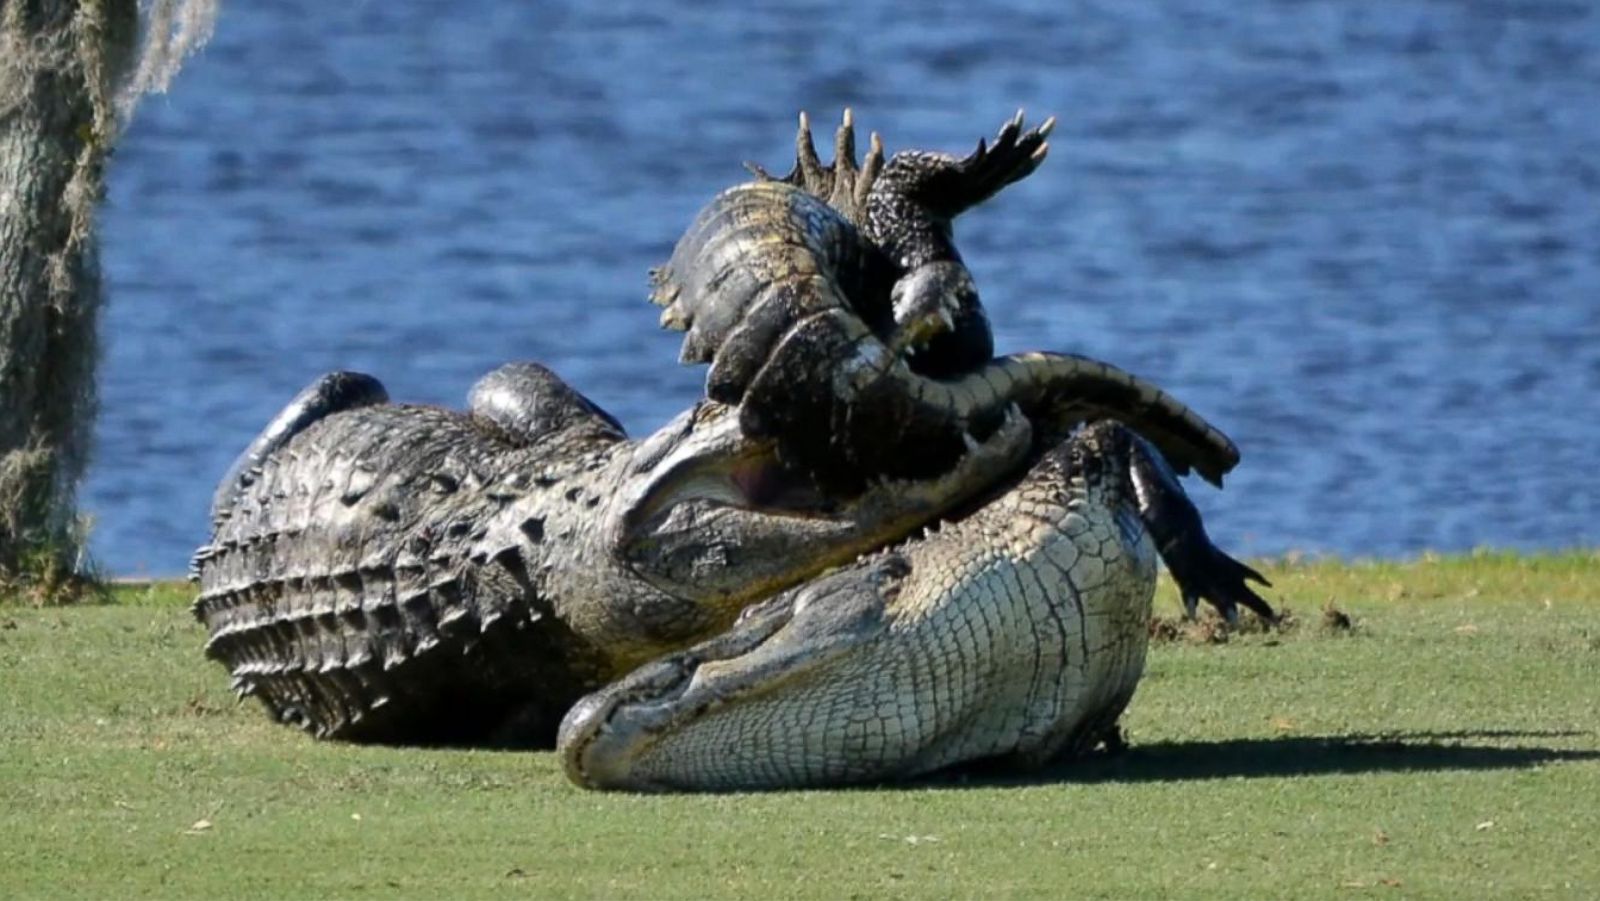 Goliath the Gator' Stalks Another Gator Before Tackling Him - ABC News